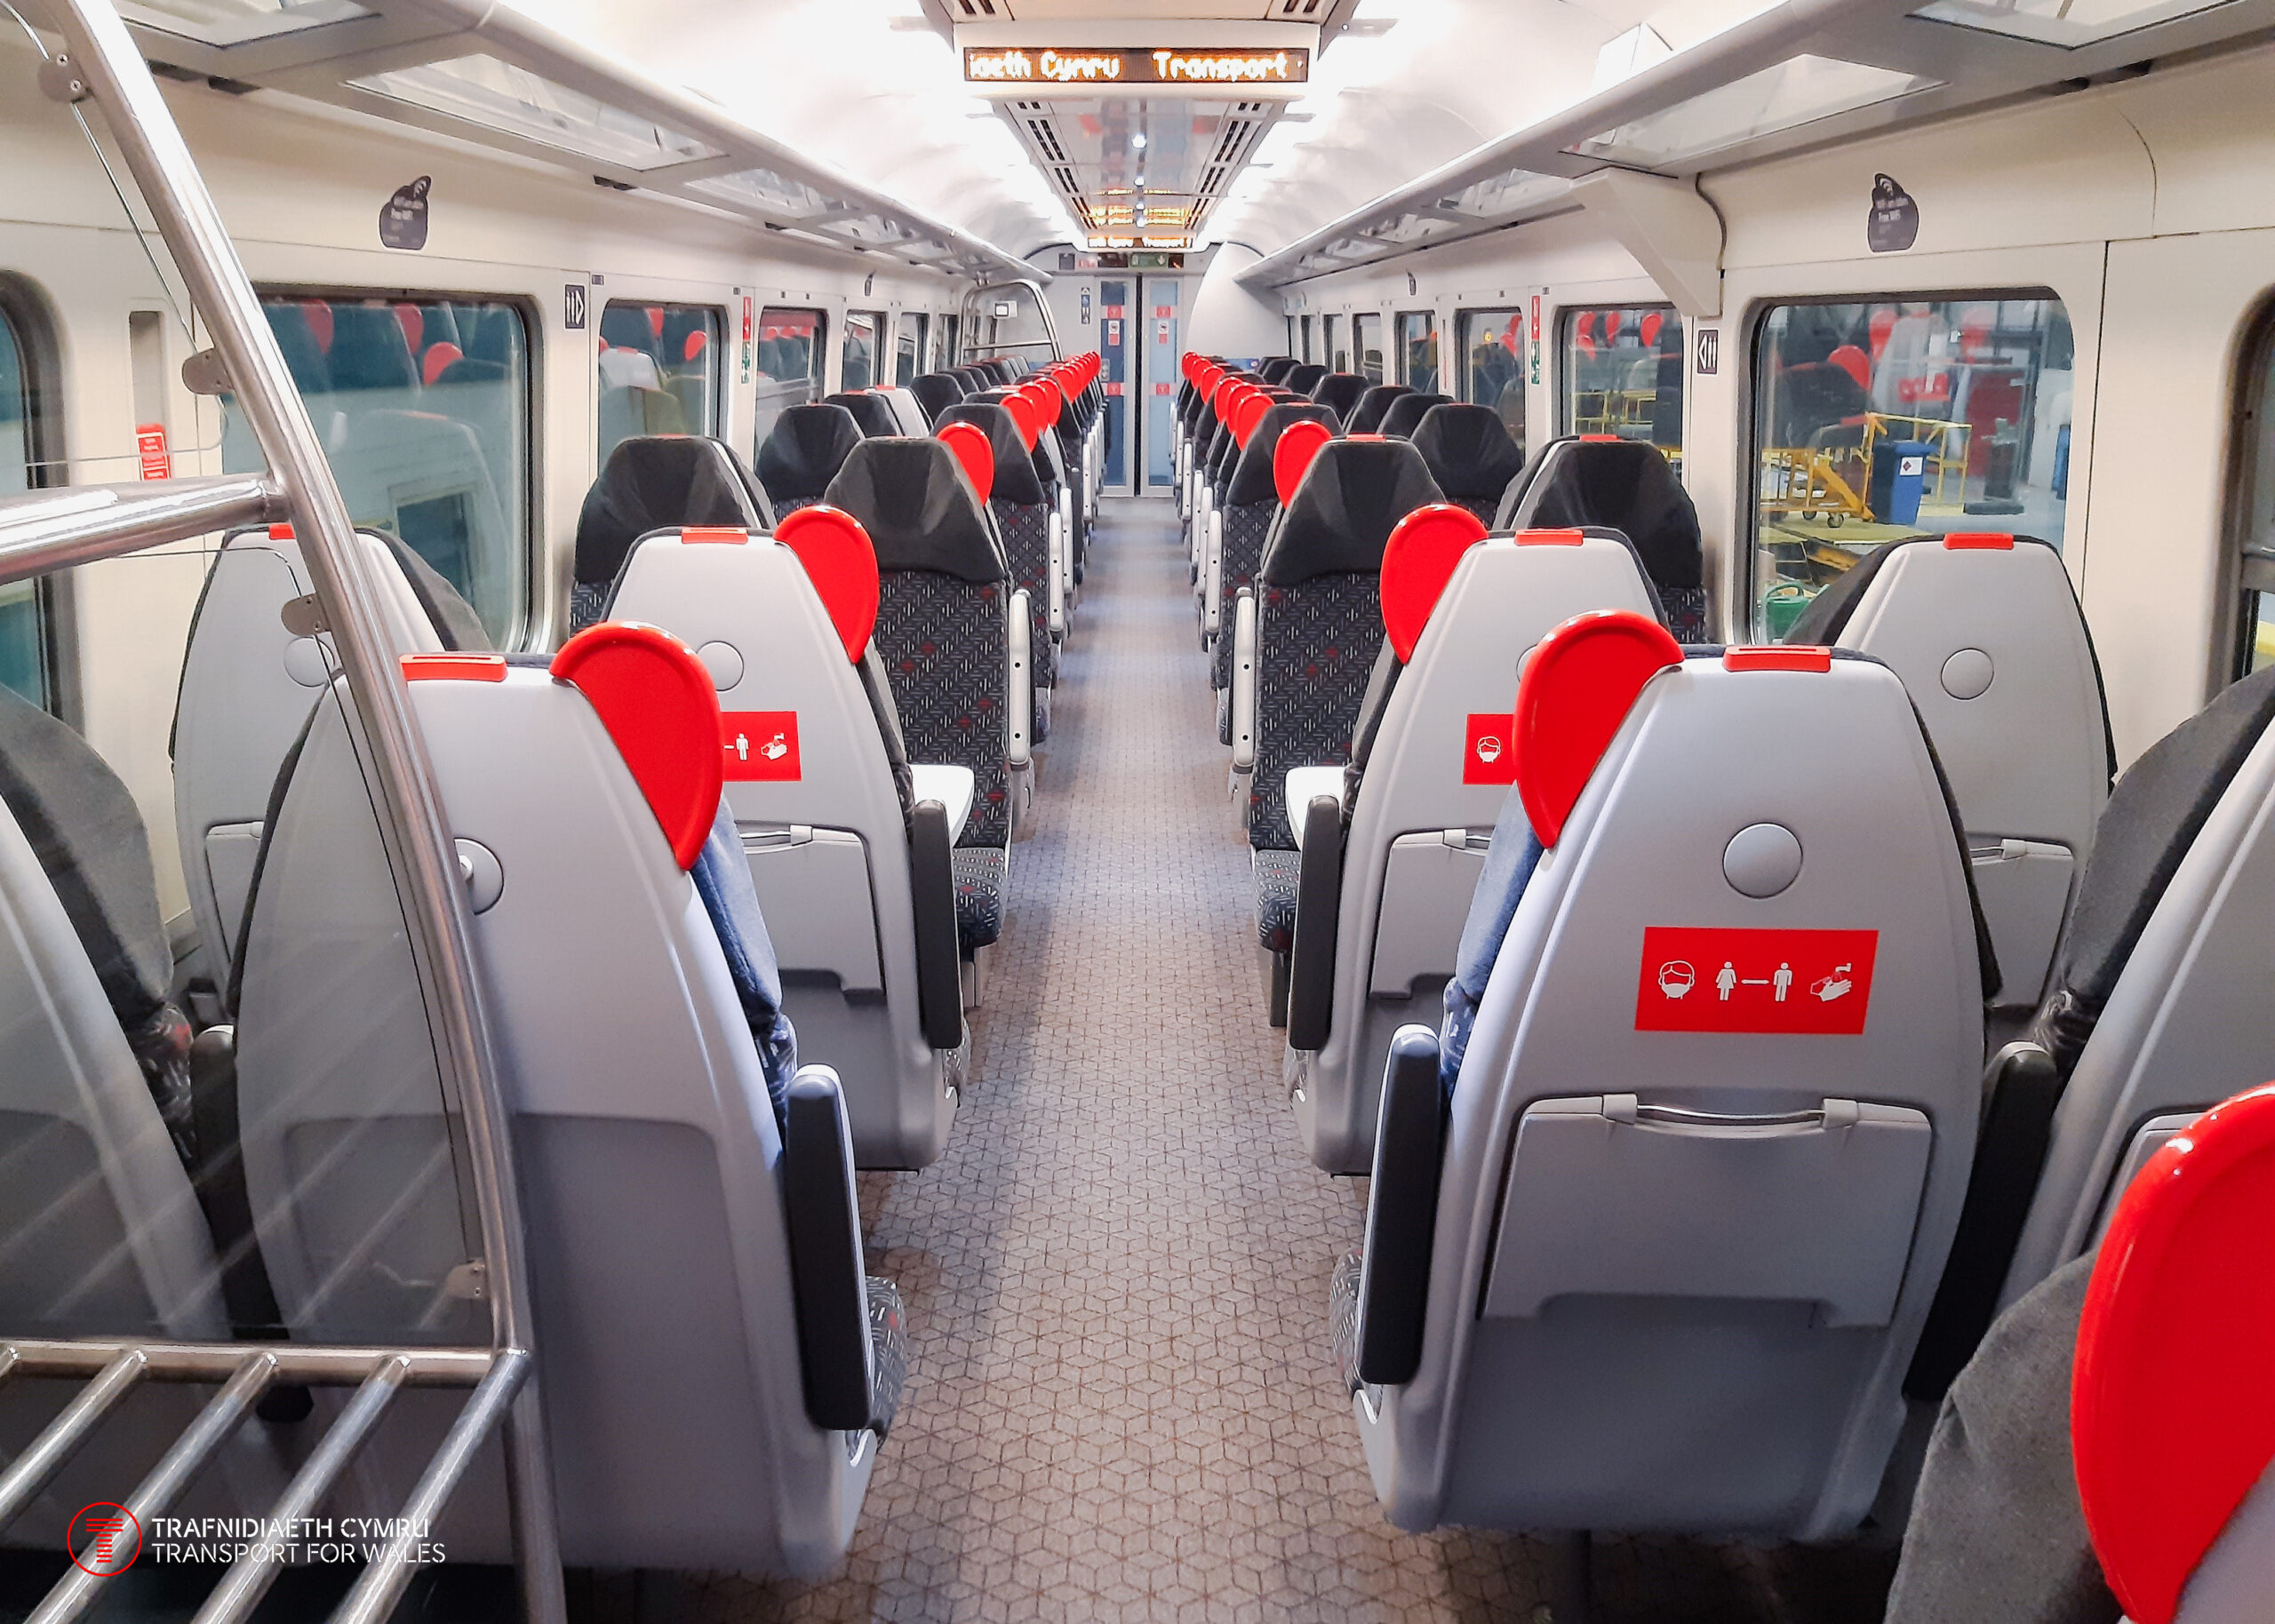 The interior of a refurbished Class 158 train